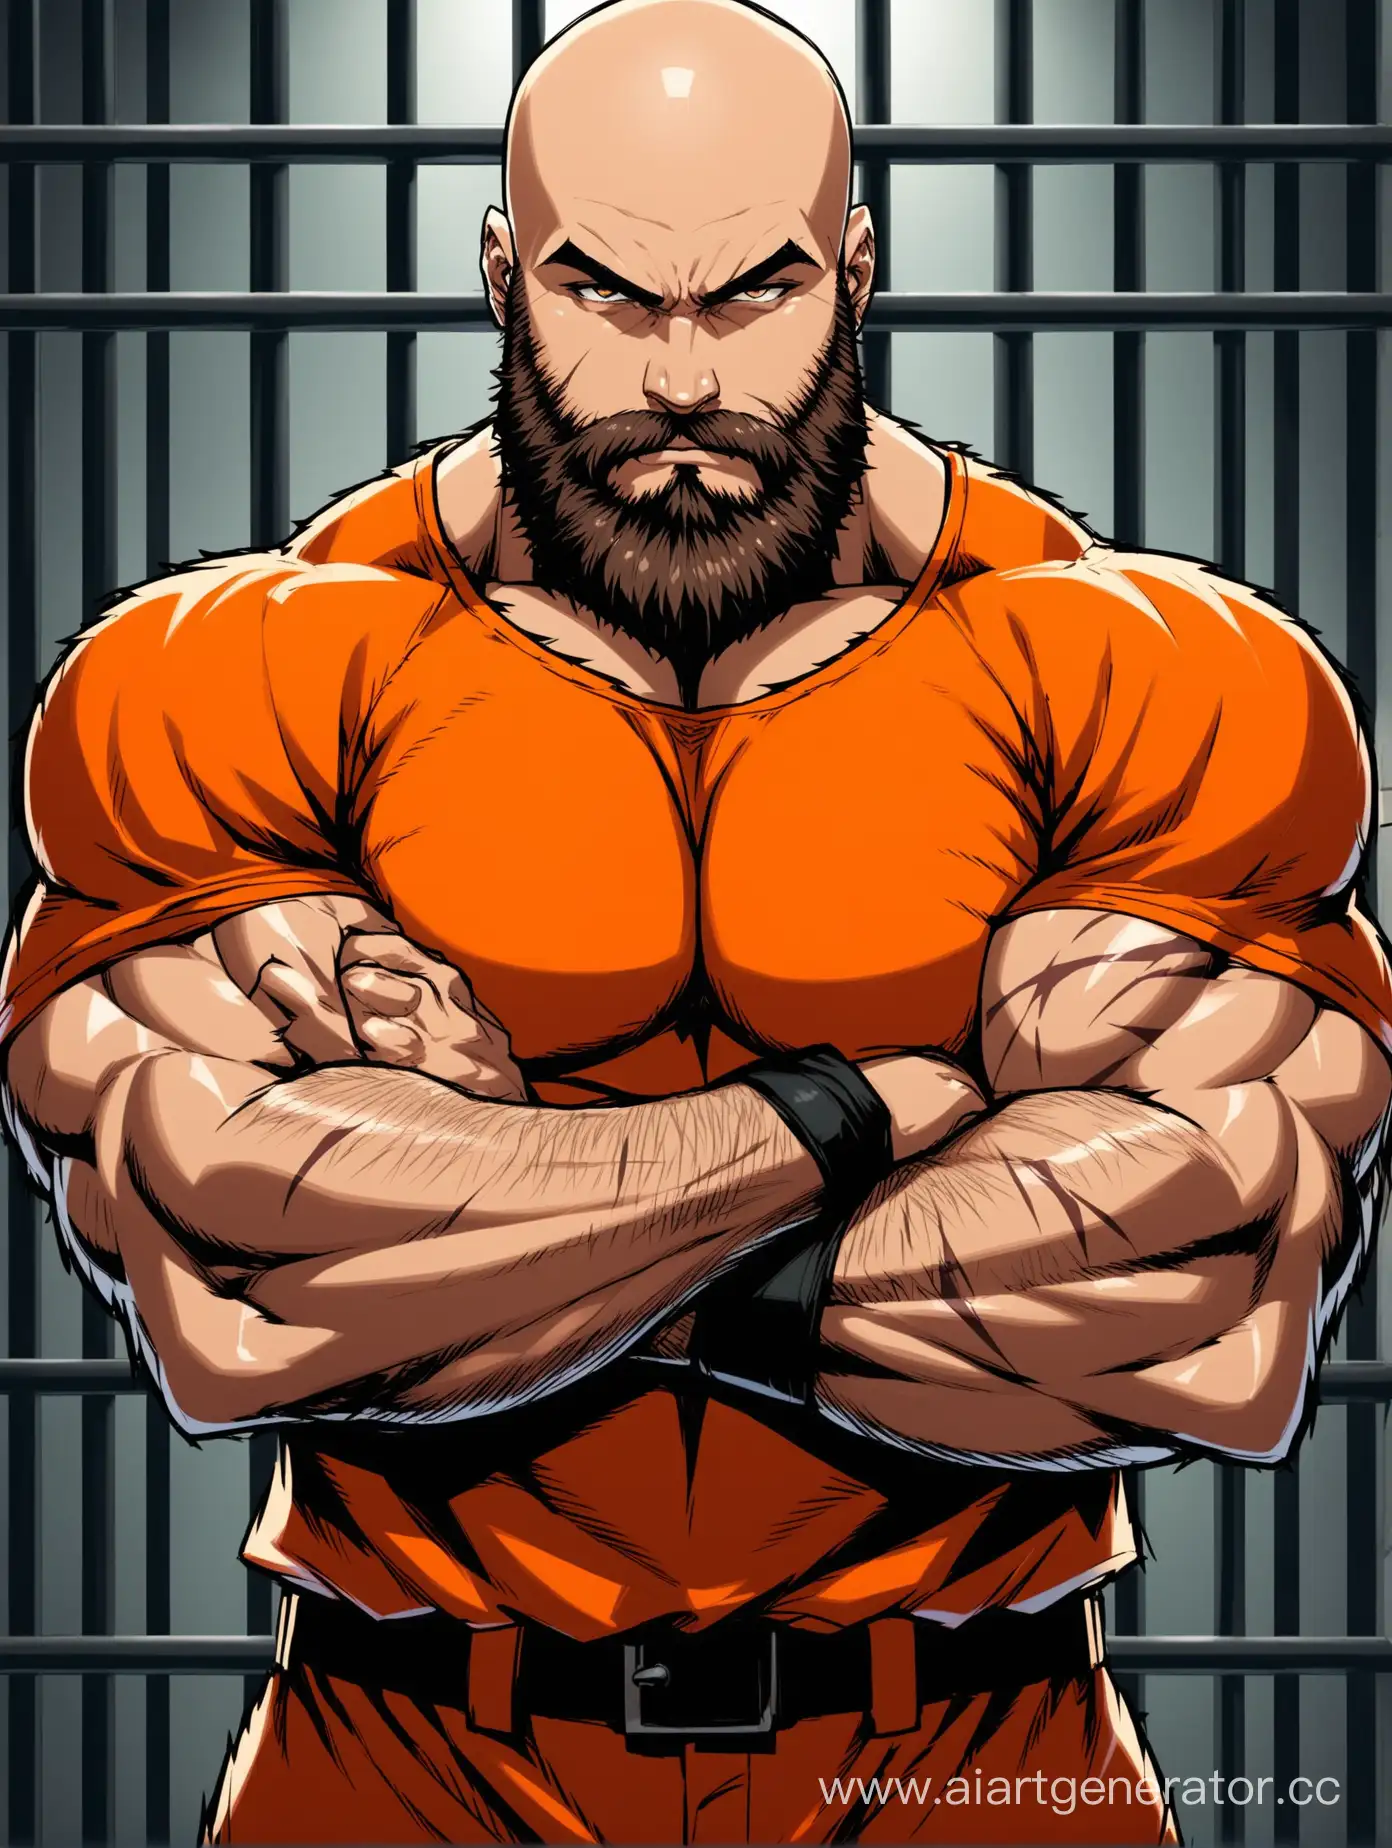 Serious-Bald-Muscular-Man-in-Orange-Prison-Suit-with-Crossed-Arms